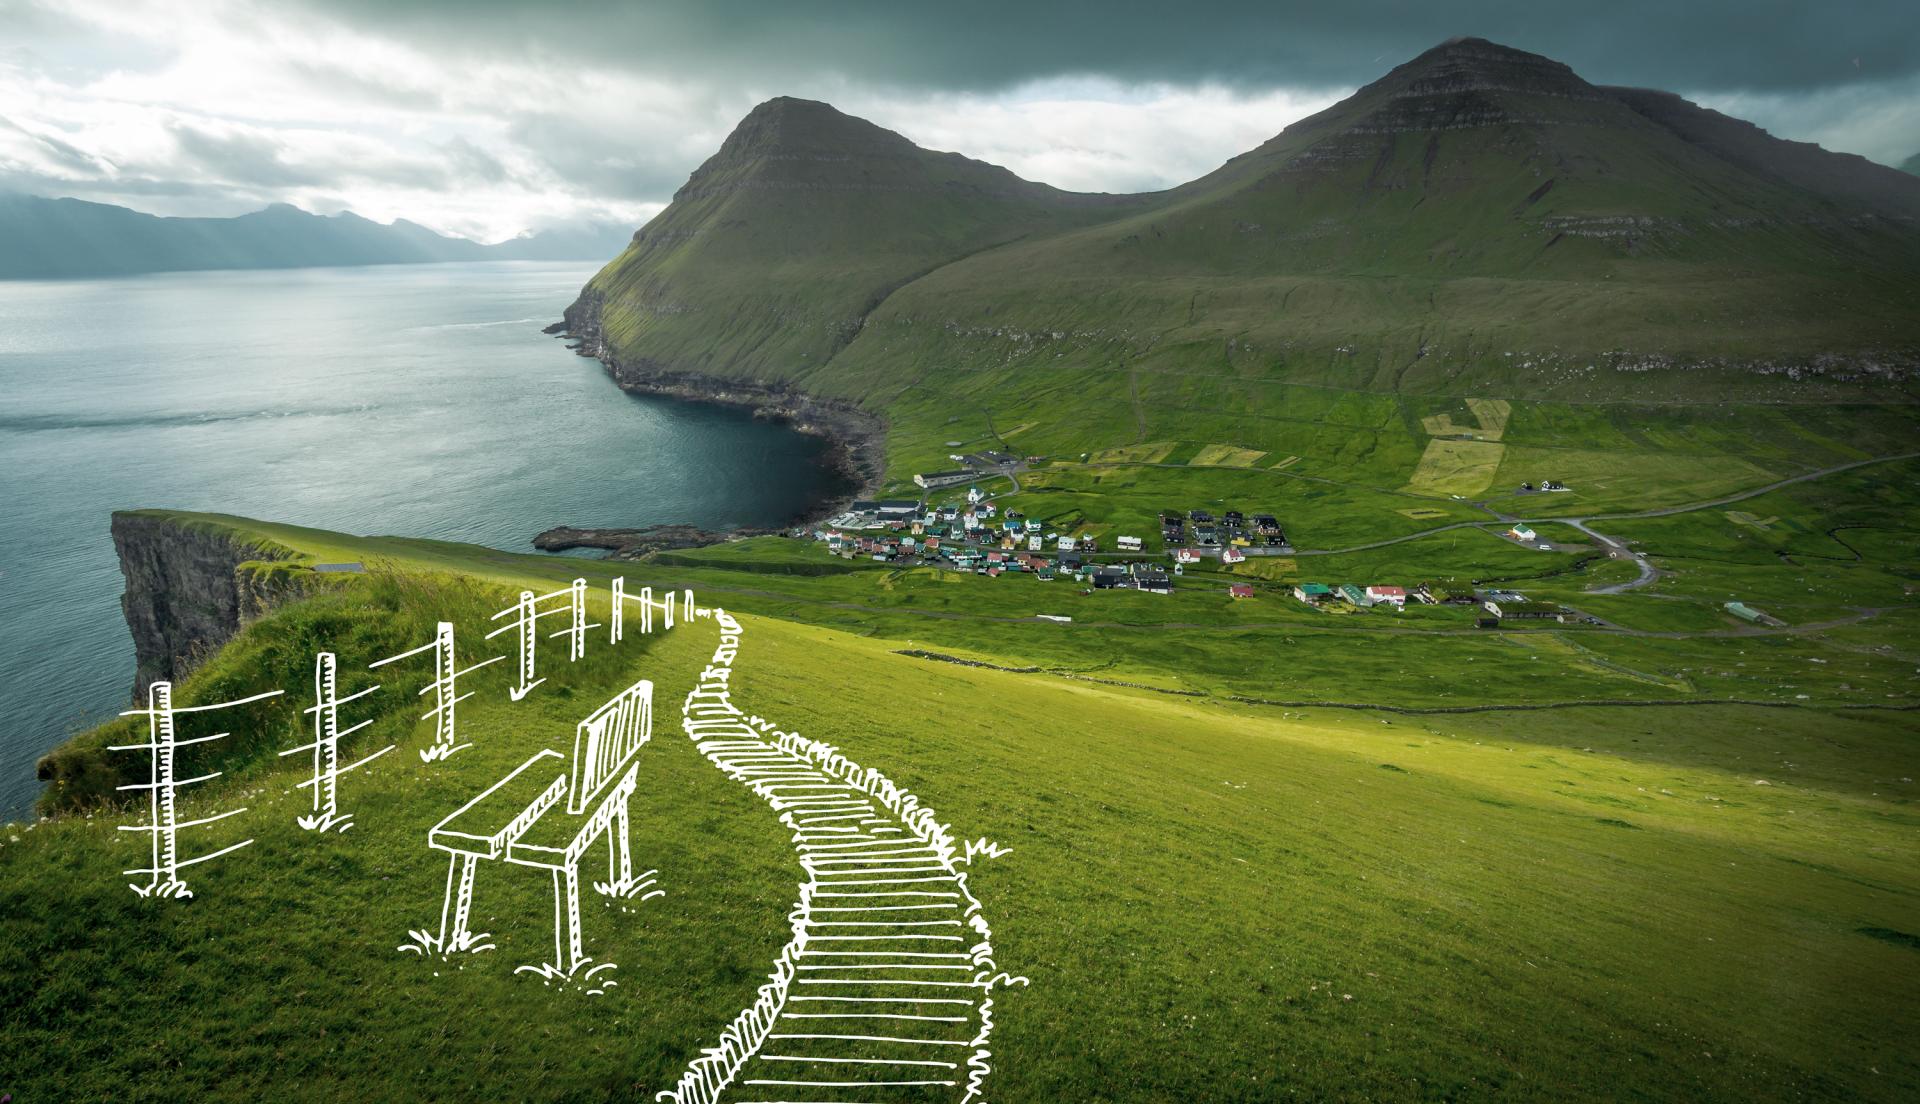 In the village of Gjógv, a path from the village to one of the scenic viewpoints will be mended, and a fence erected to keep hikers safe